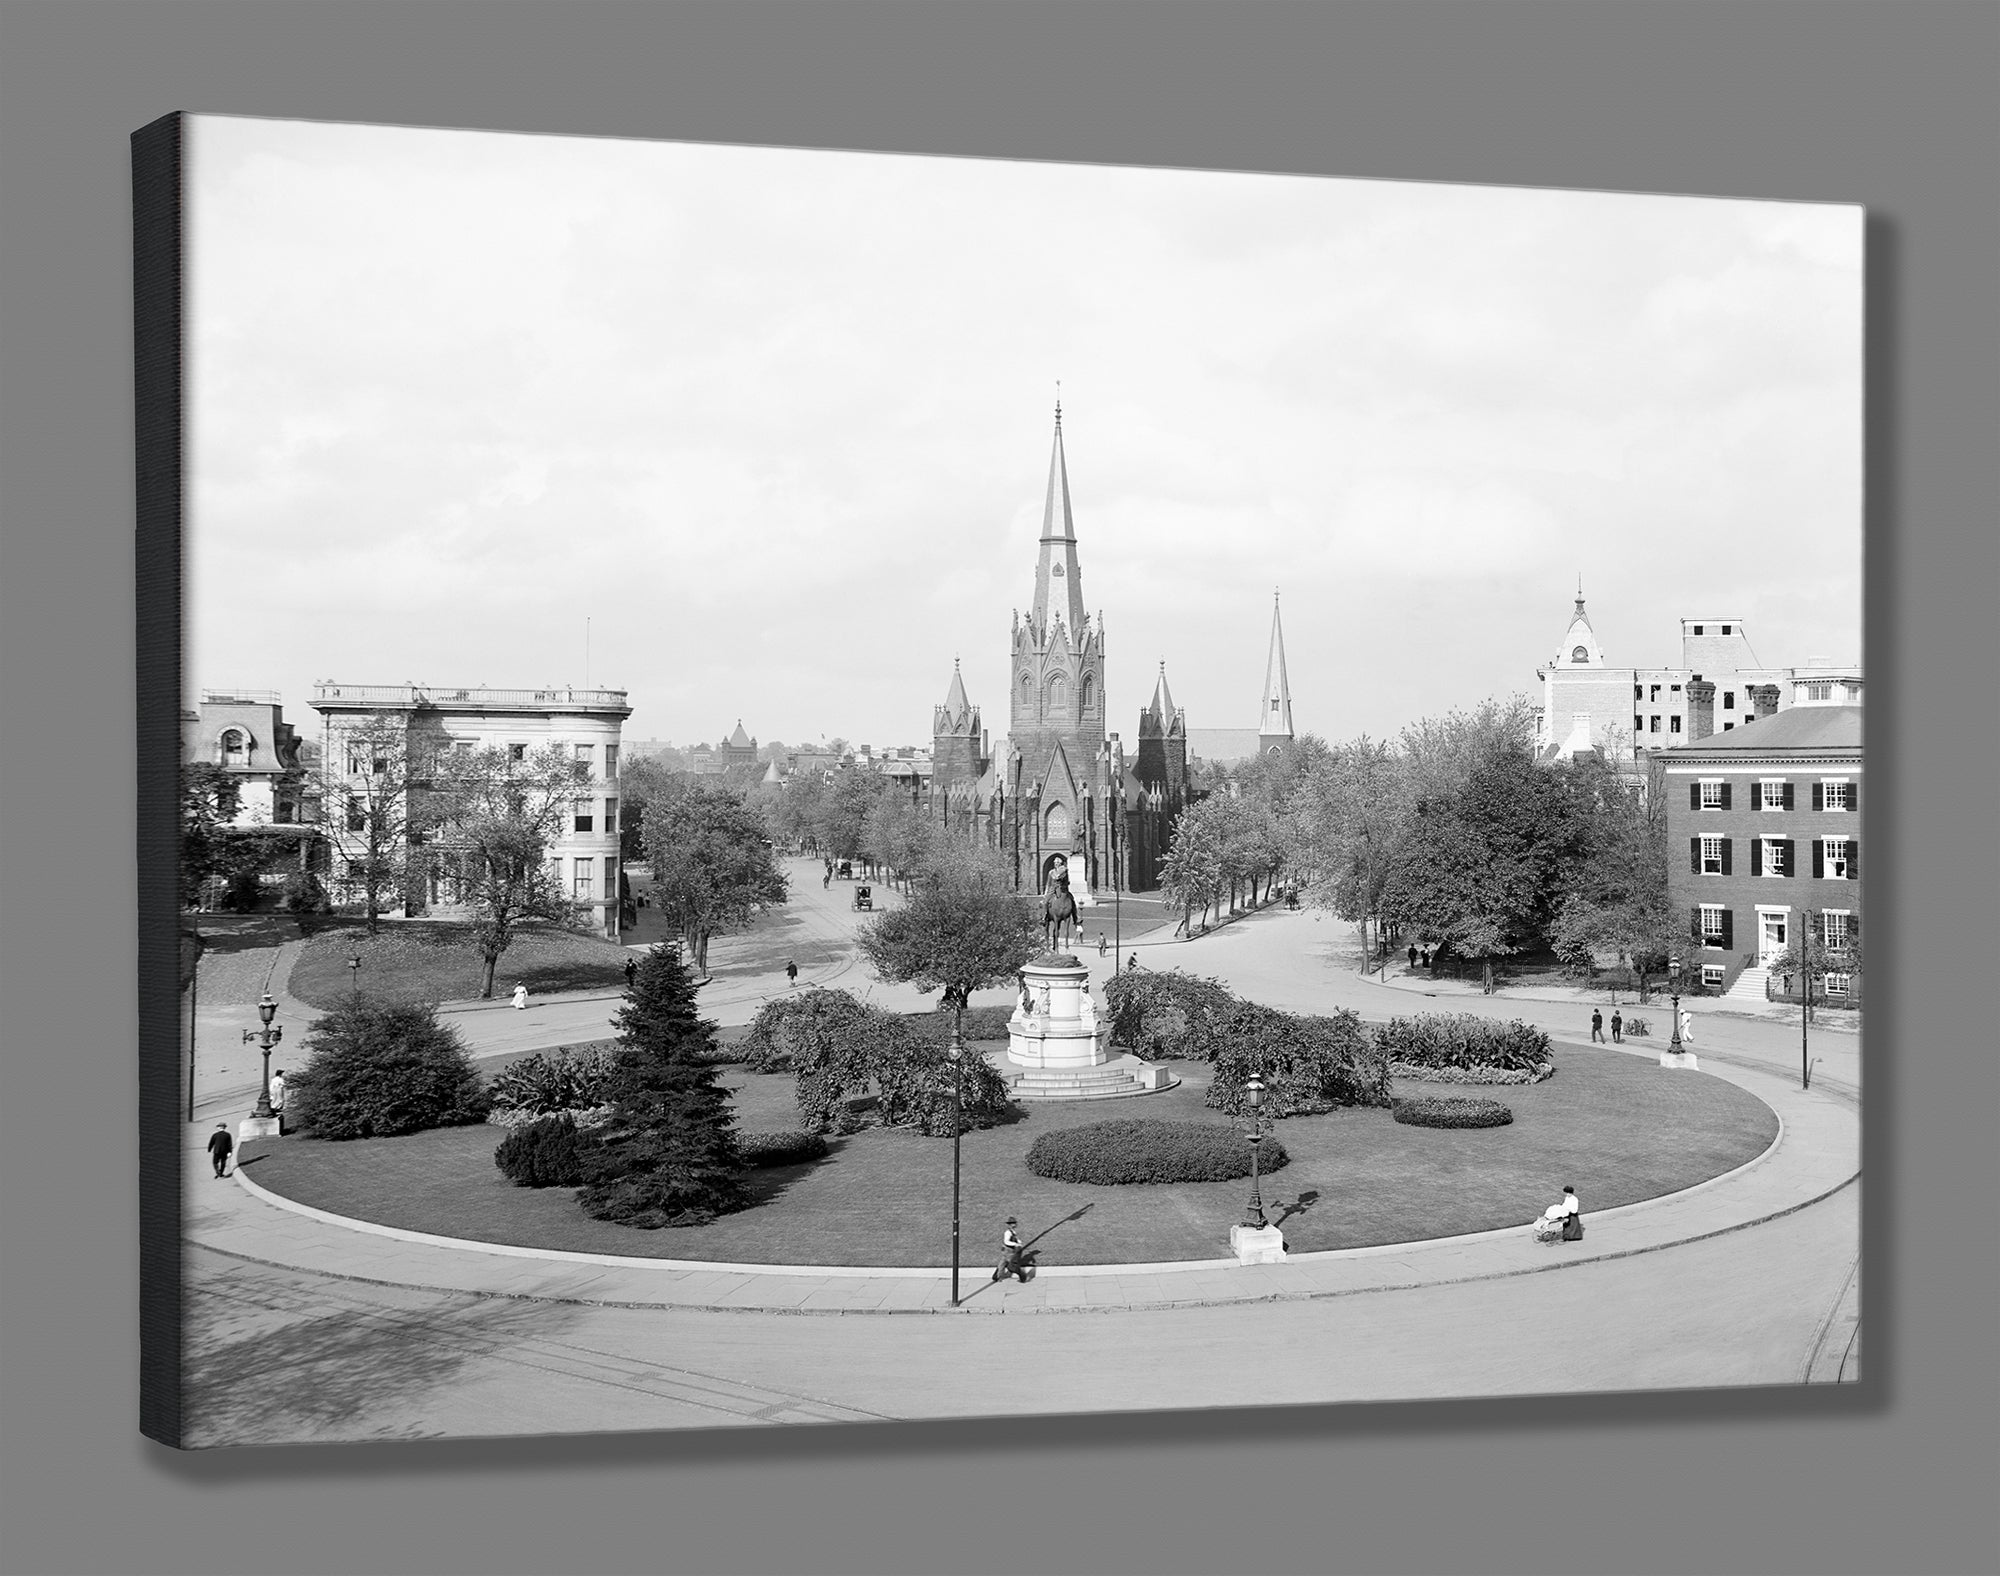 A stretched canvas print of a black and white photo of Washington DC's Thomas Circle